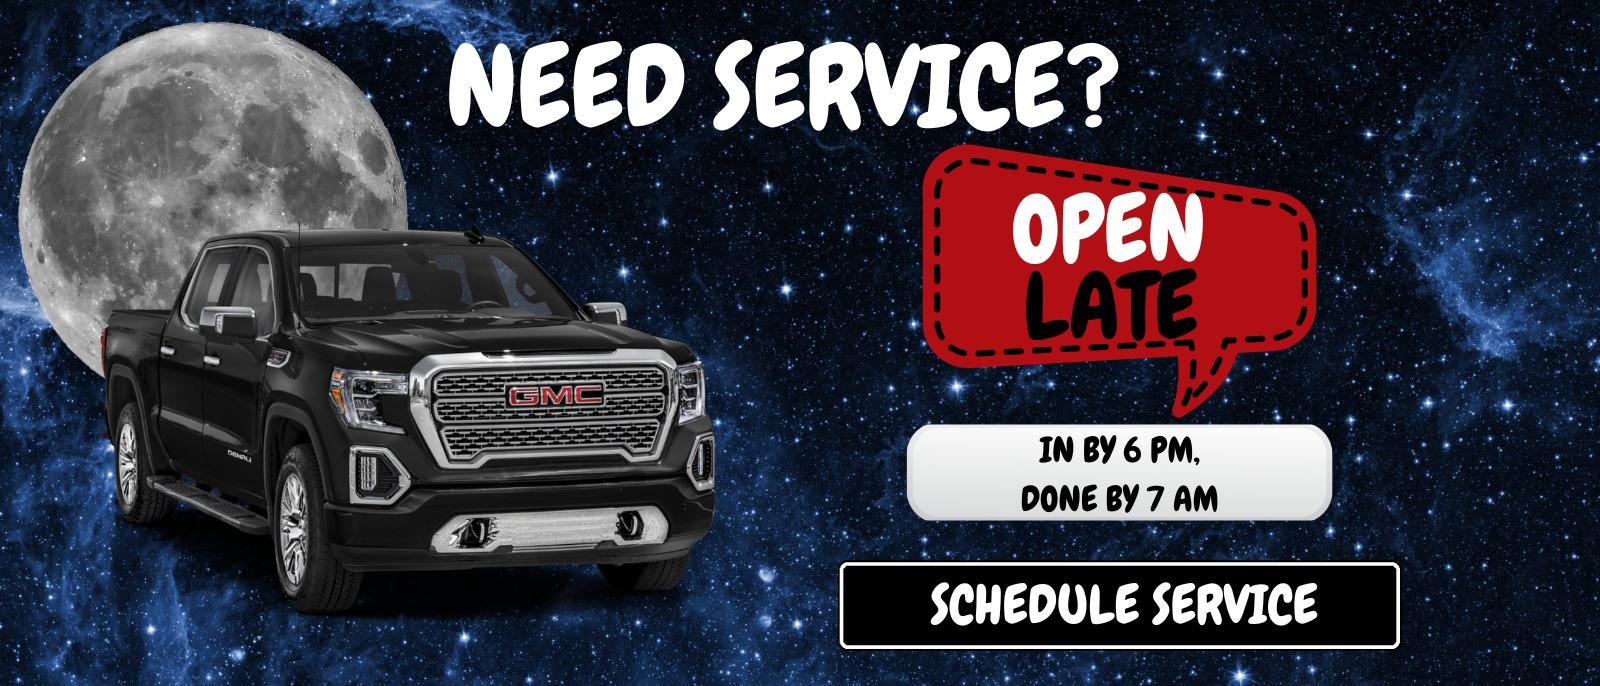 Liberty GMC Service is open late